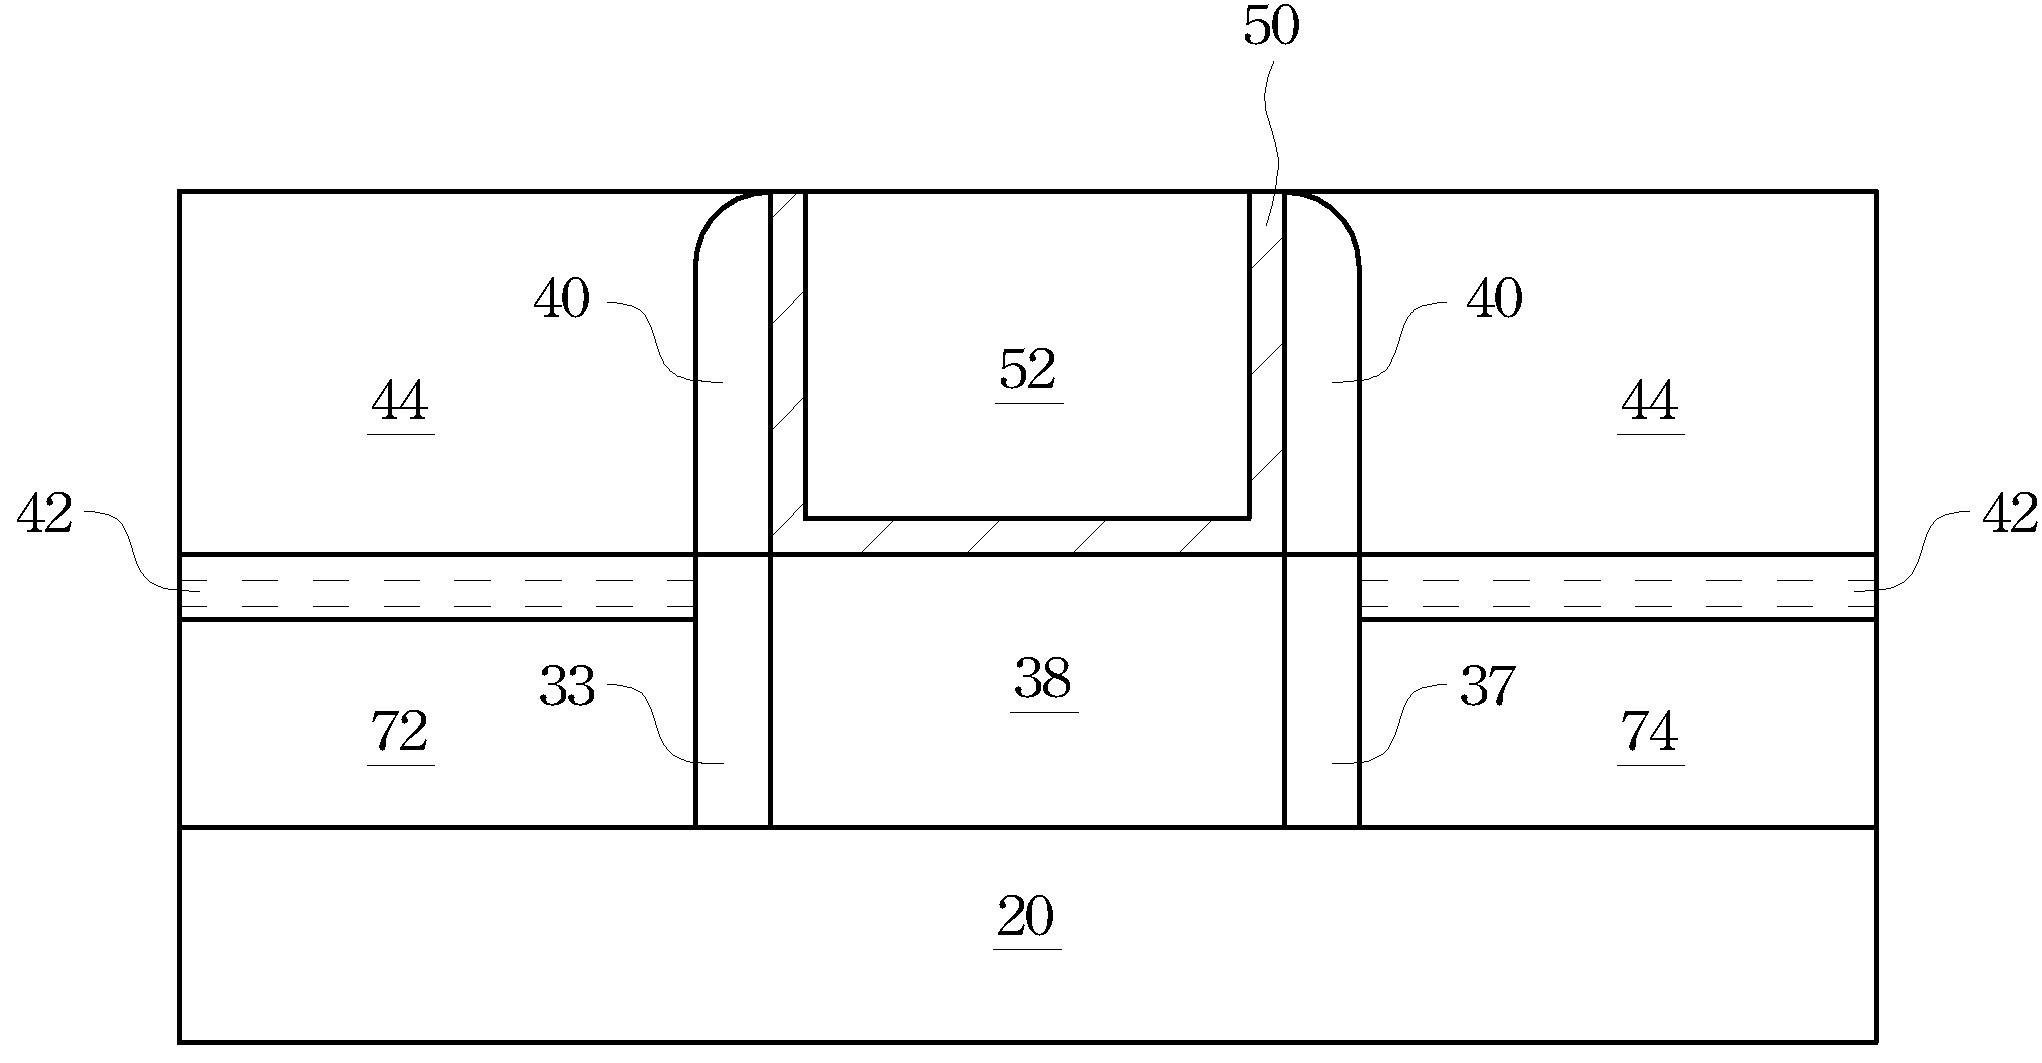 Tunnel field-effect transistor with narrow band-gap channel and strong gate coupling